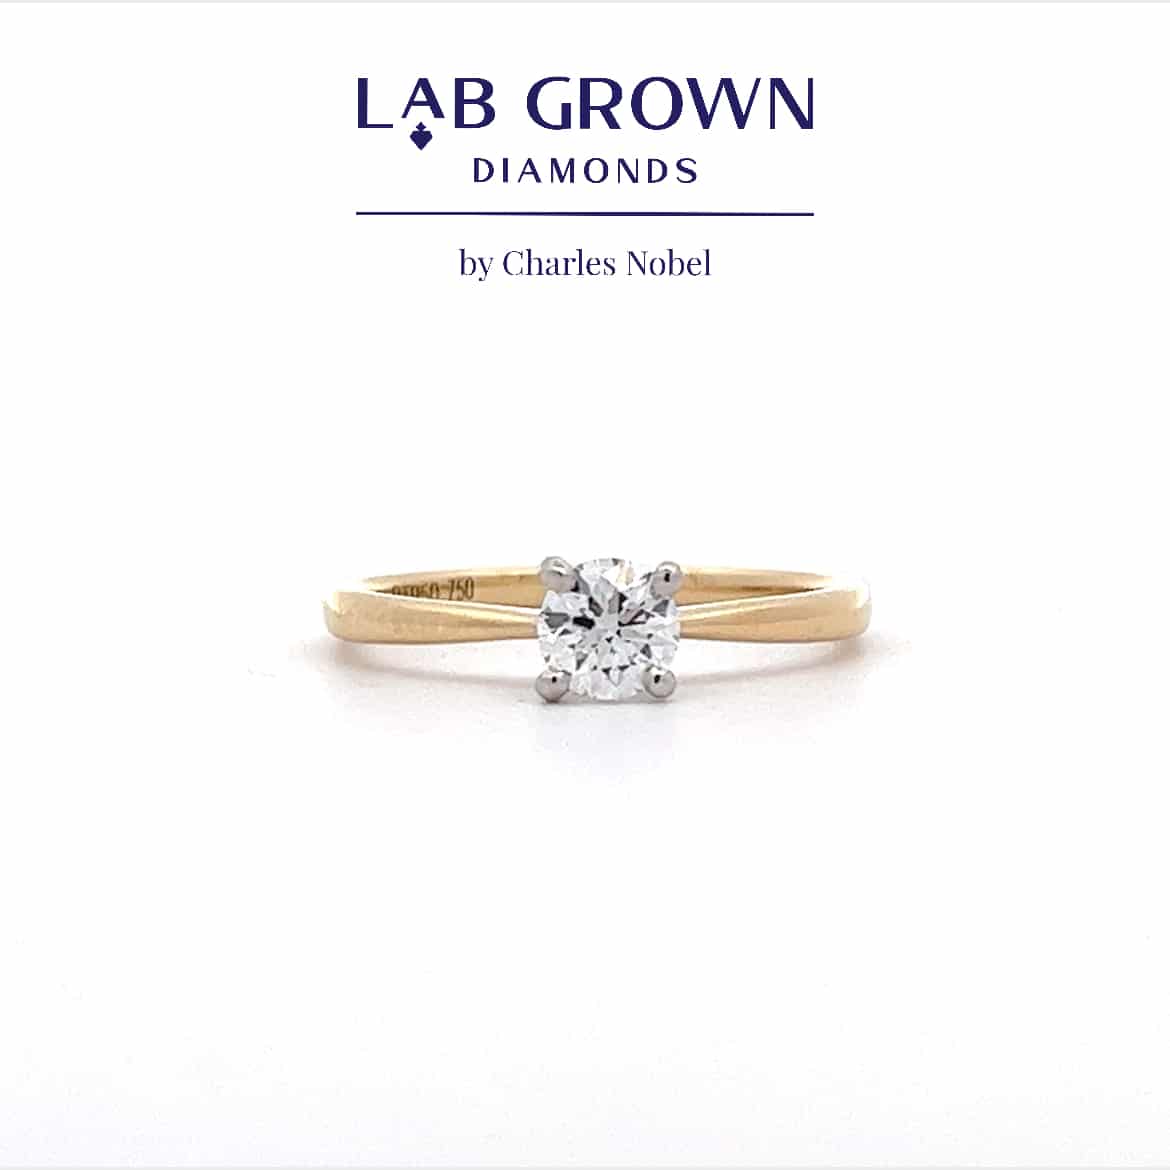 0.38ct, E colour, VS2 Clarity Lab Grown Diamond set in a 4 Claw 18ct and Platinum Mount – Ideal Cut